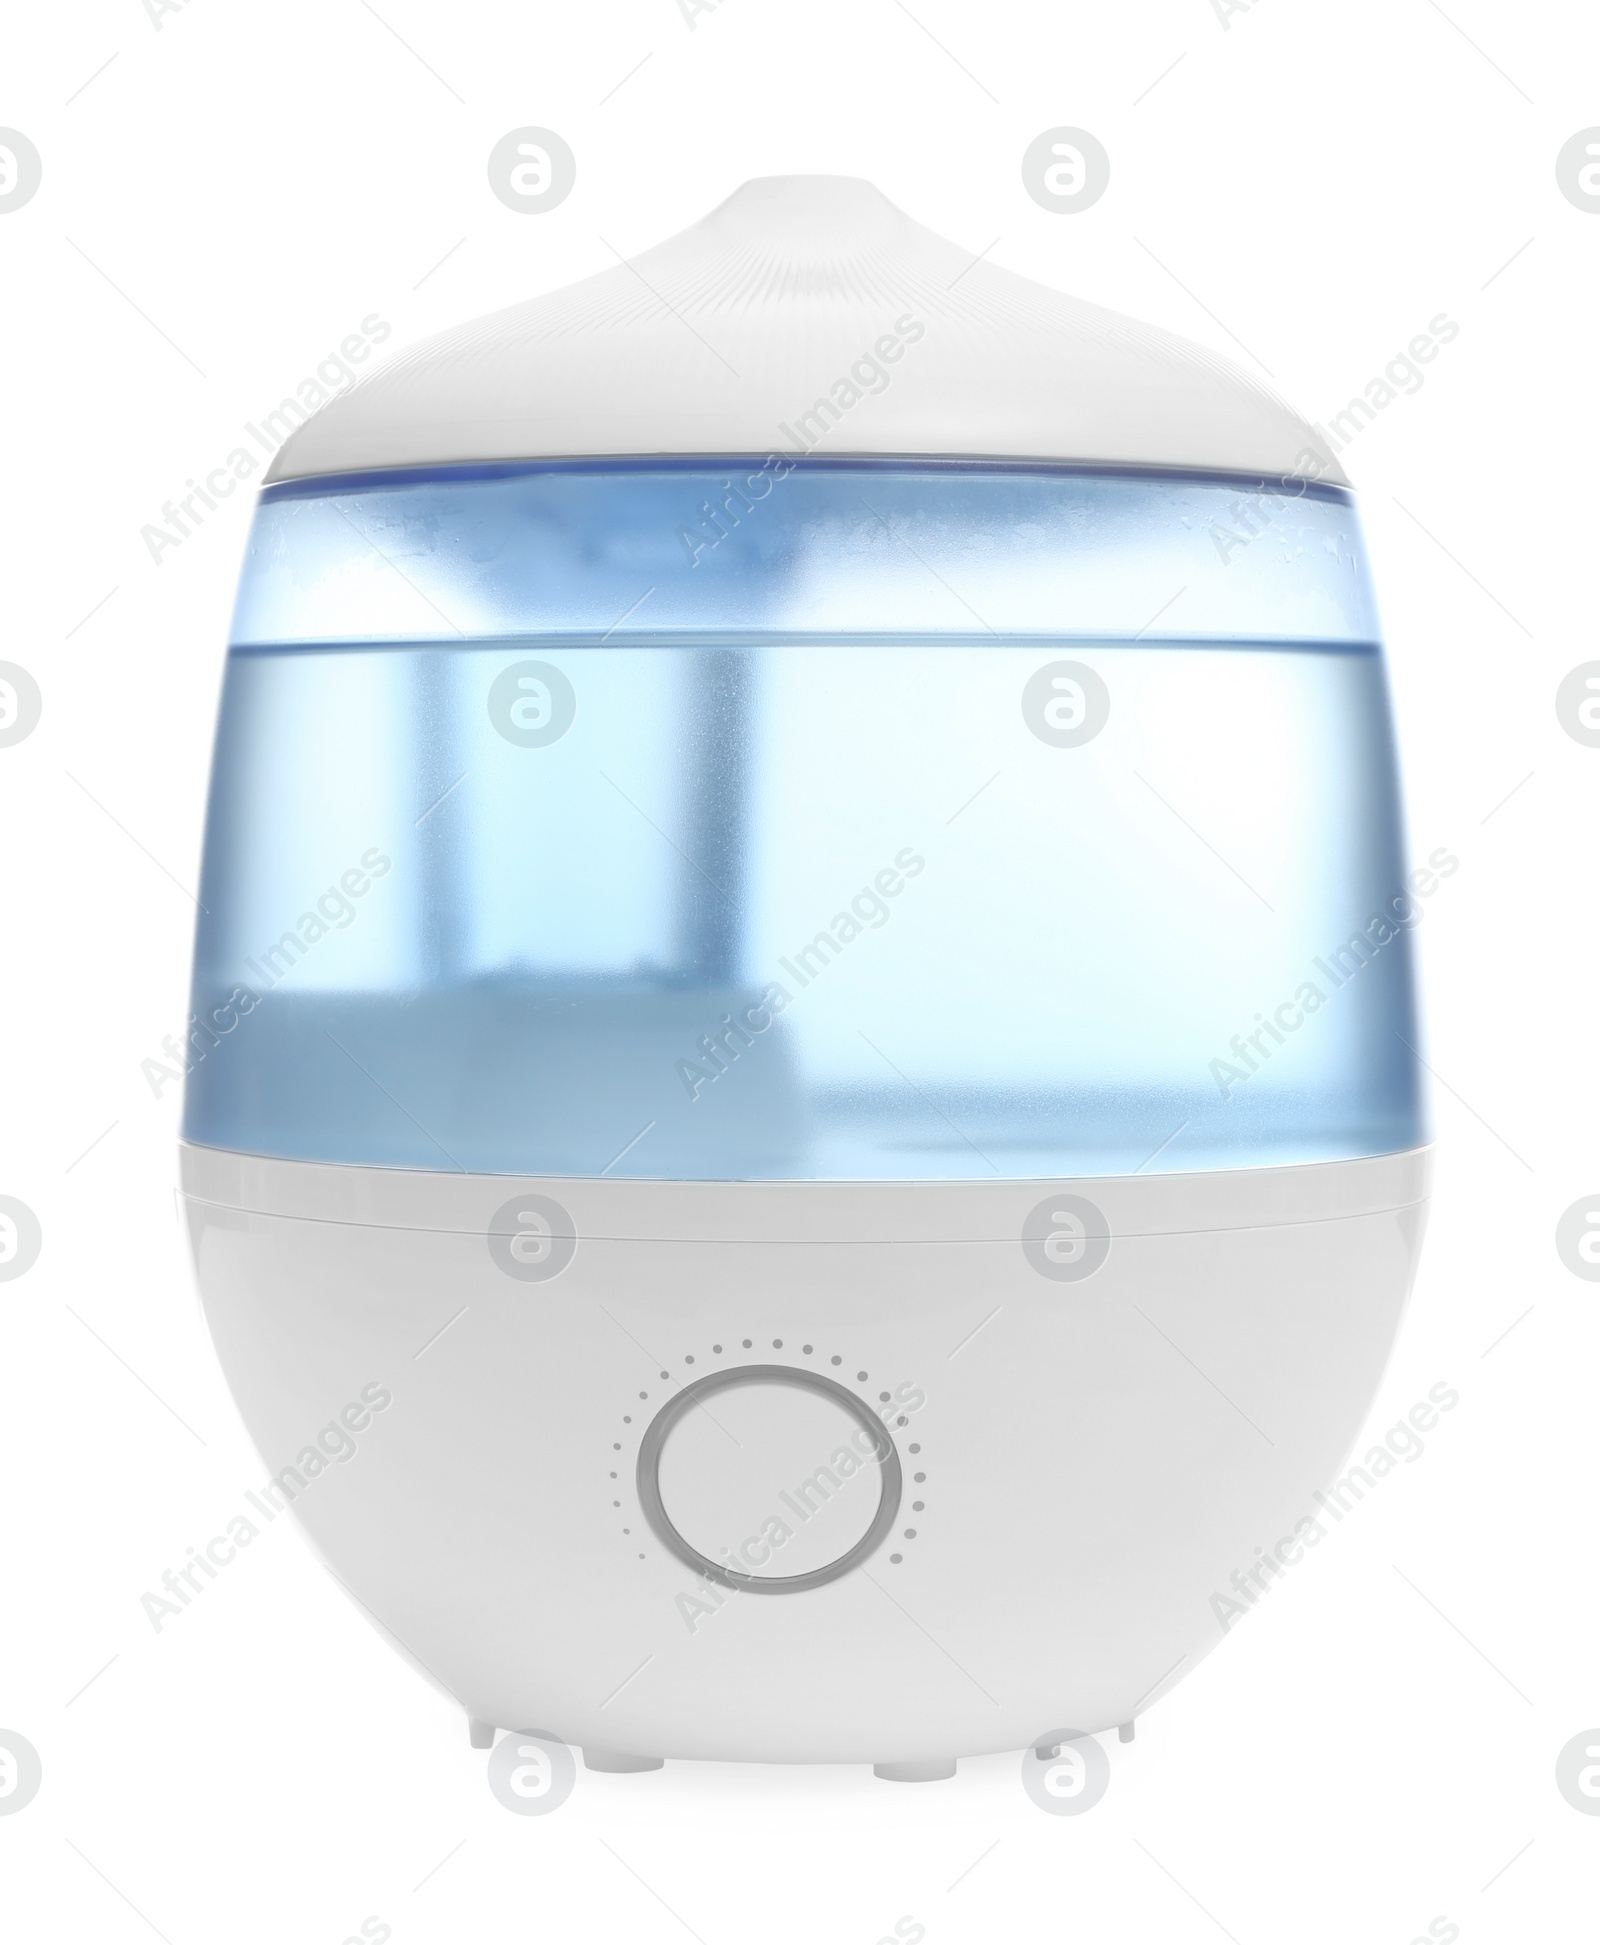 Photo of New modern air humidifier isolated on white